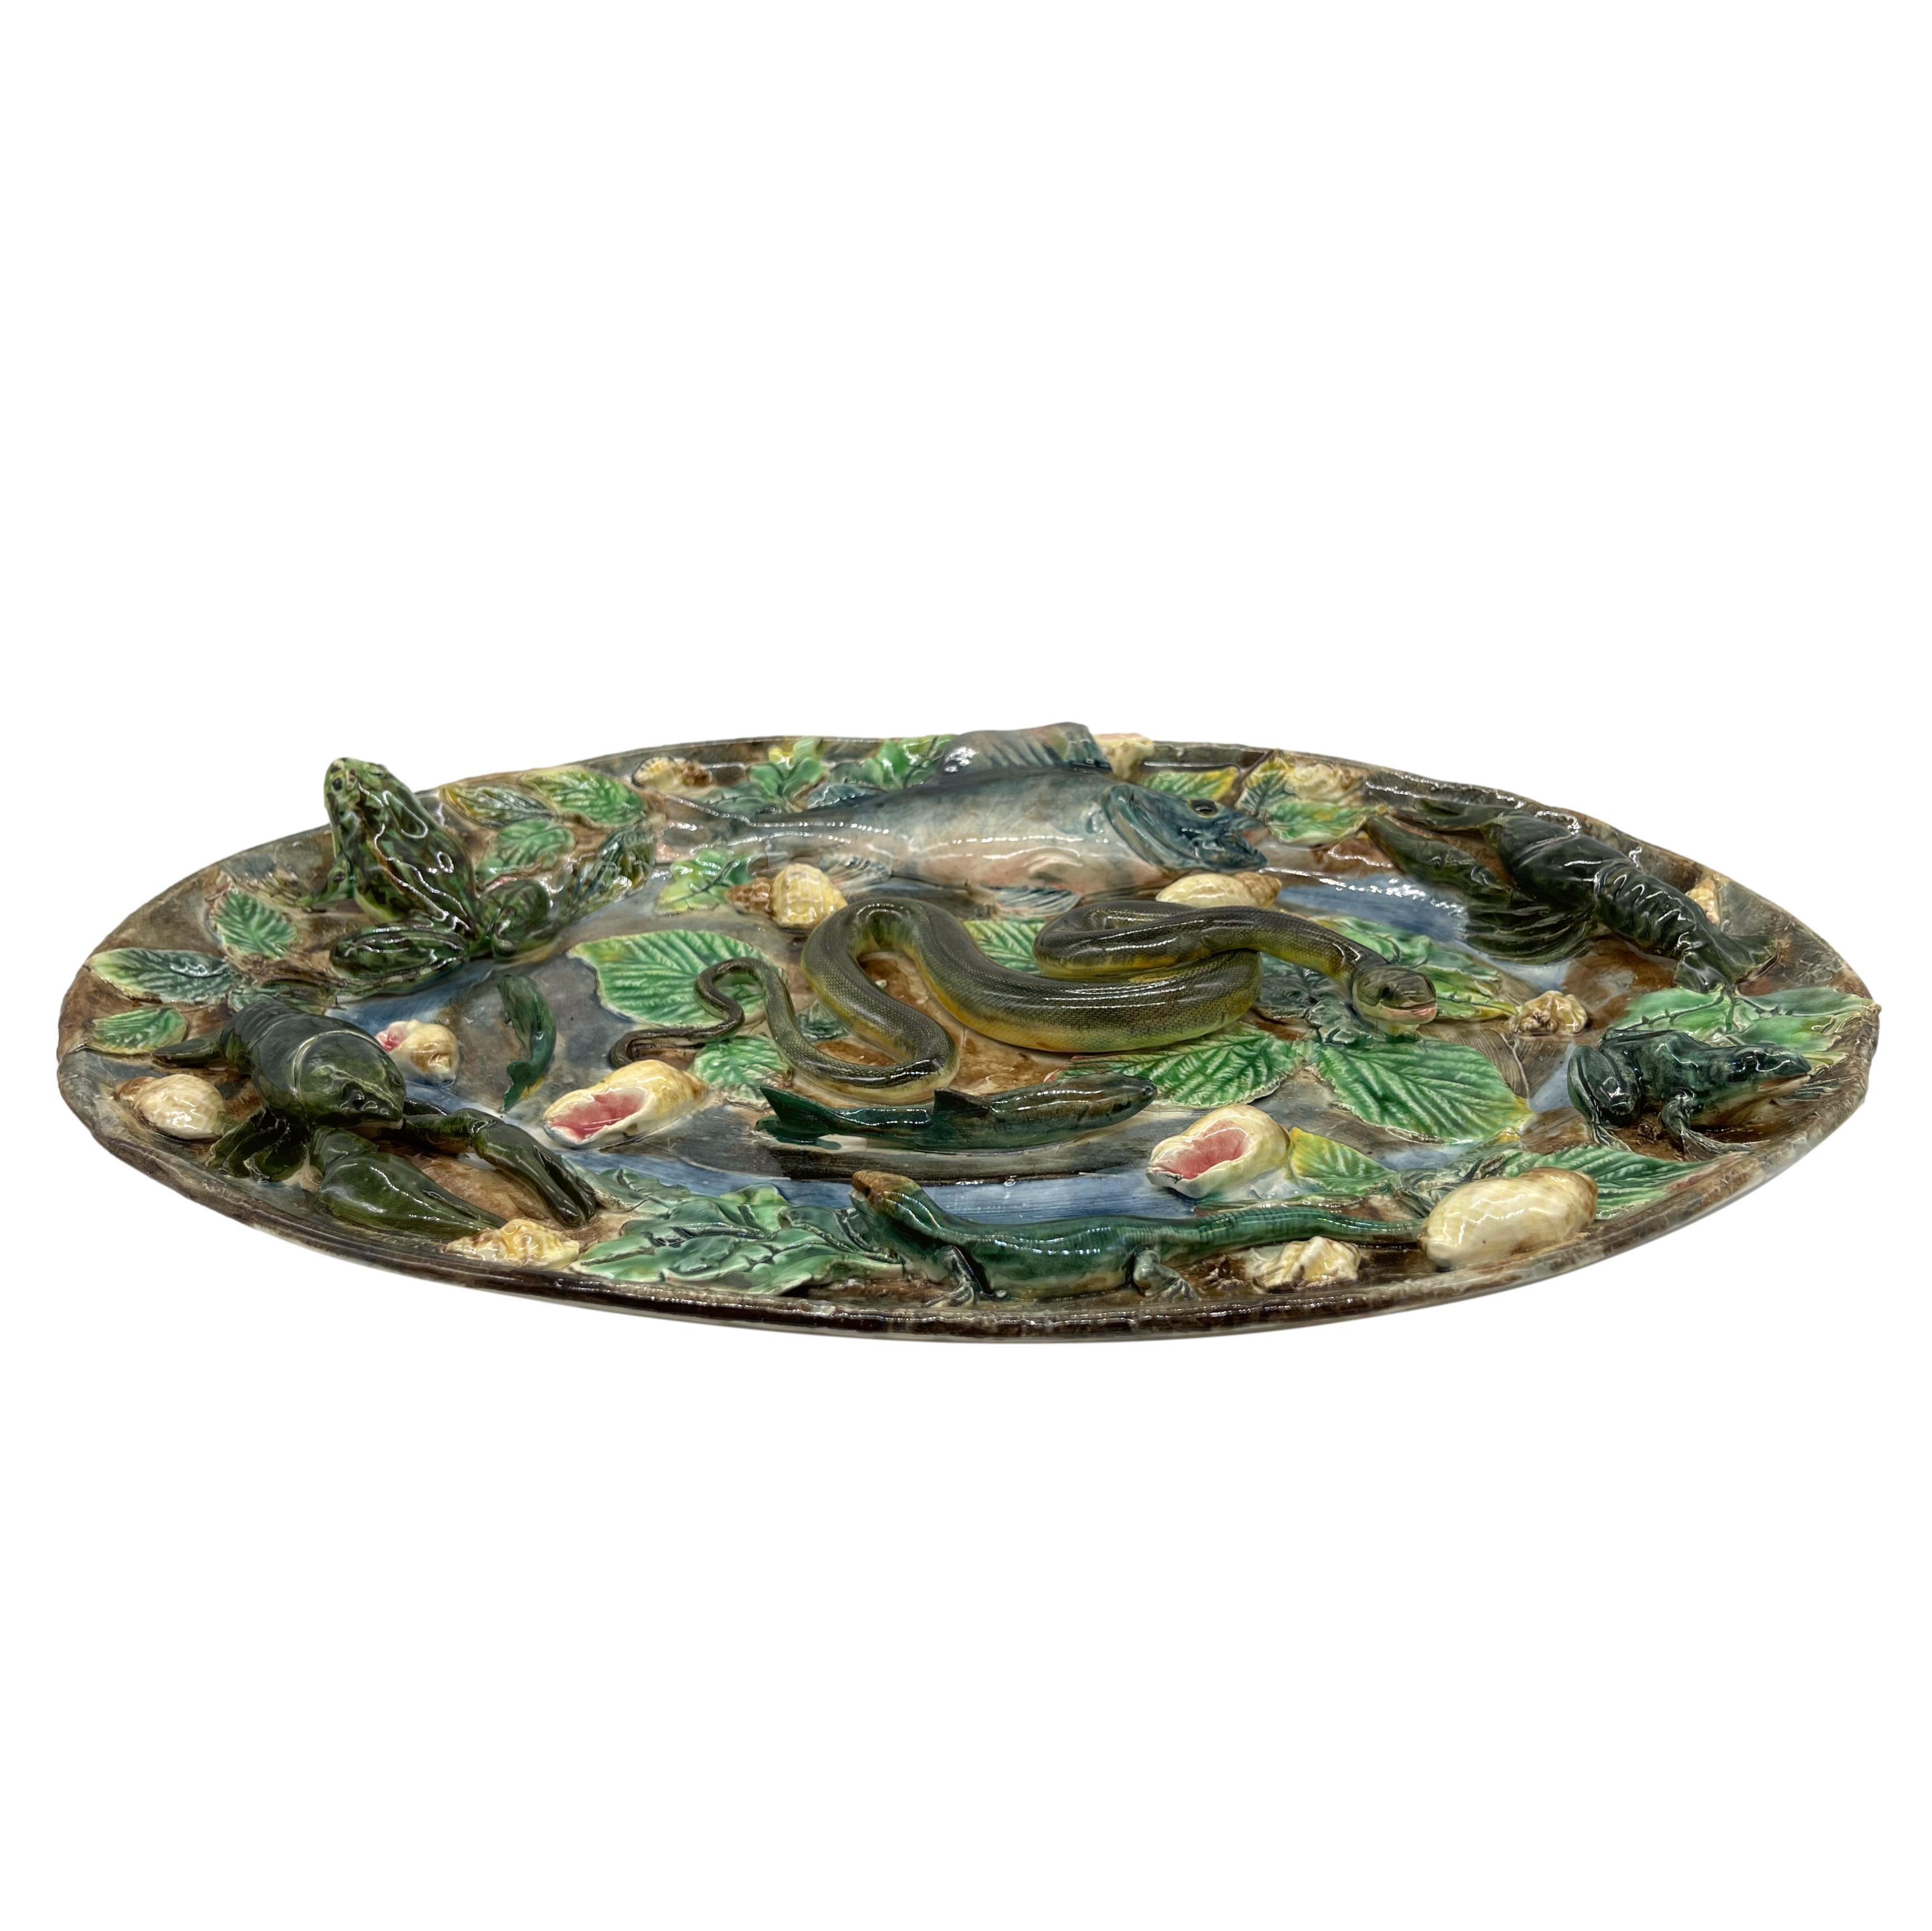 Longchamp Large Oval Palissy Ware Trompe L'oeil Platter, with molded and applied fish, two langoustines, and two naturalistically molded and glazed frogs, a green-glazed lizard, and a large snake to the center, with shells throughout, on